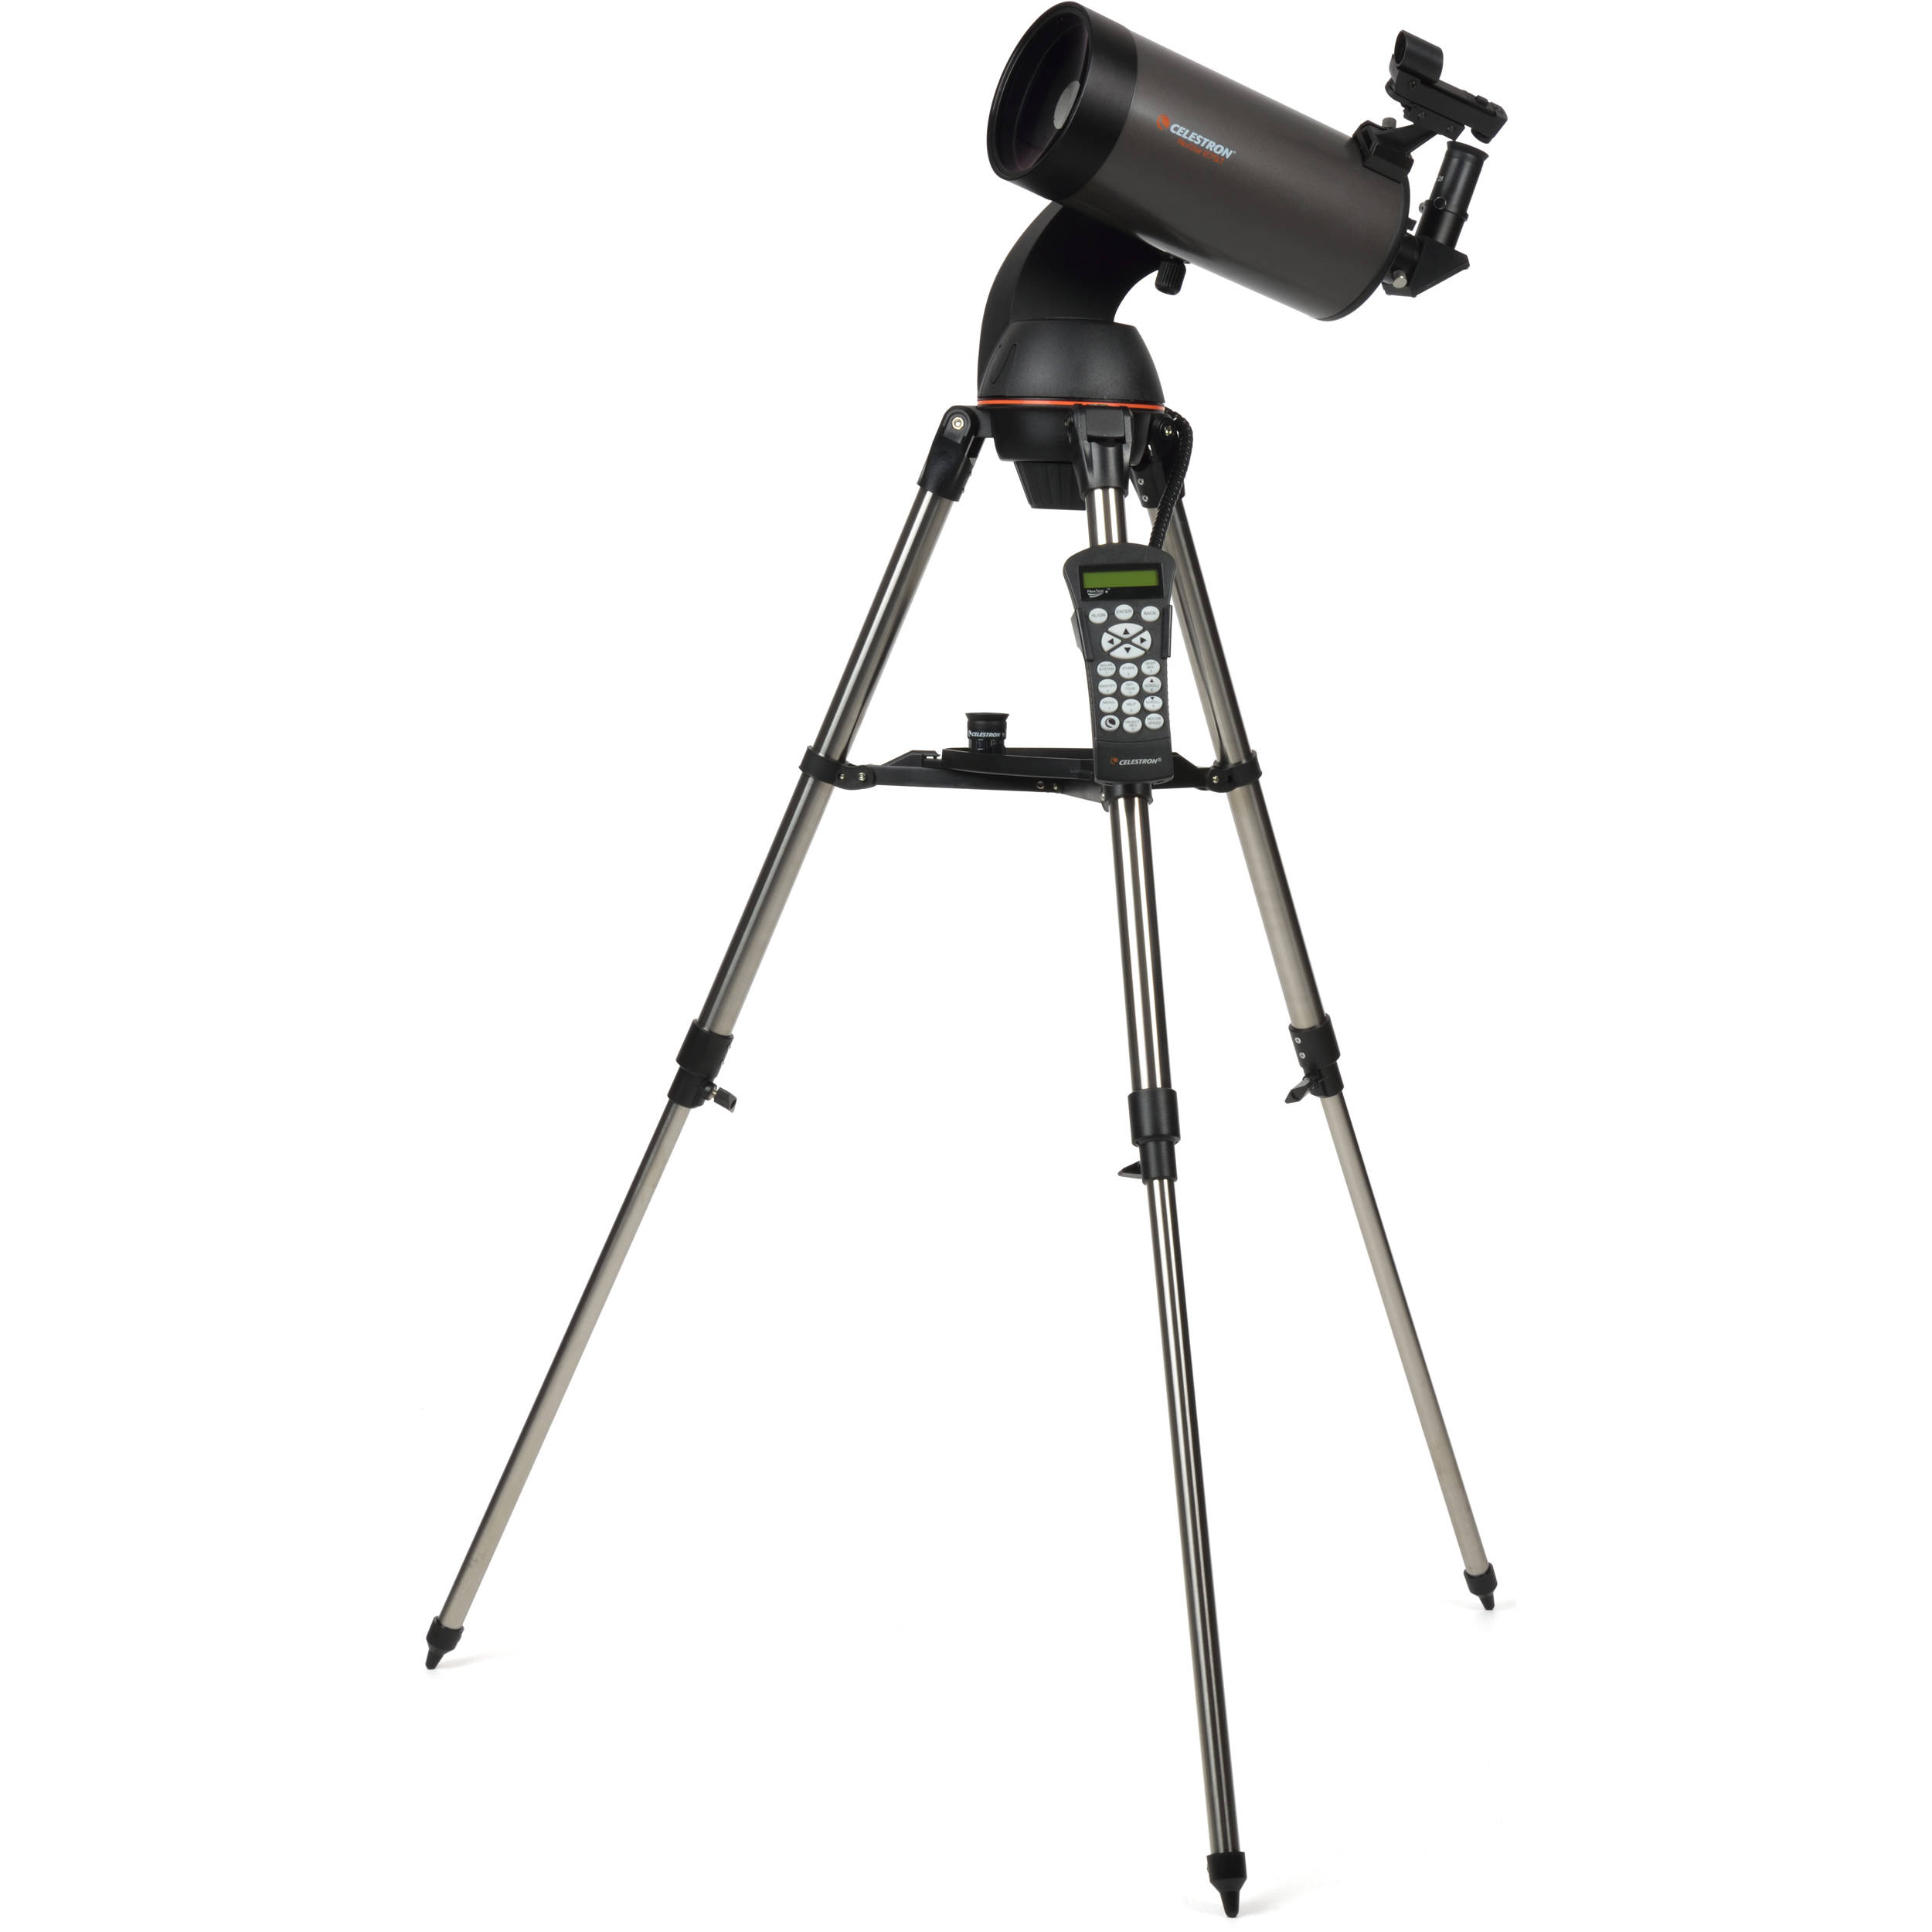 Astronomy Free Download For Mac Os X Used With Nexstar 127 Slt